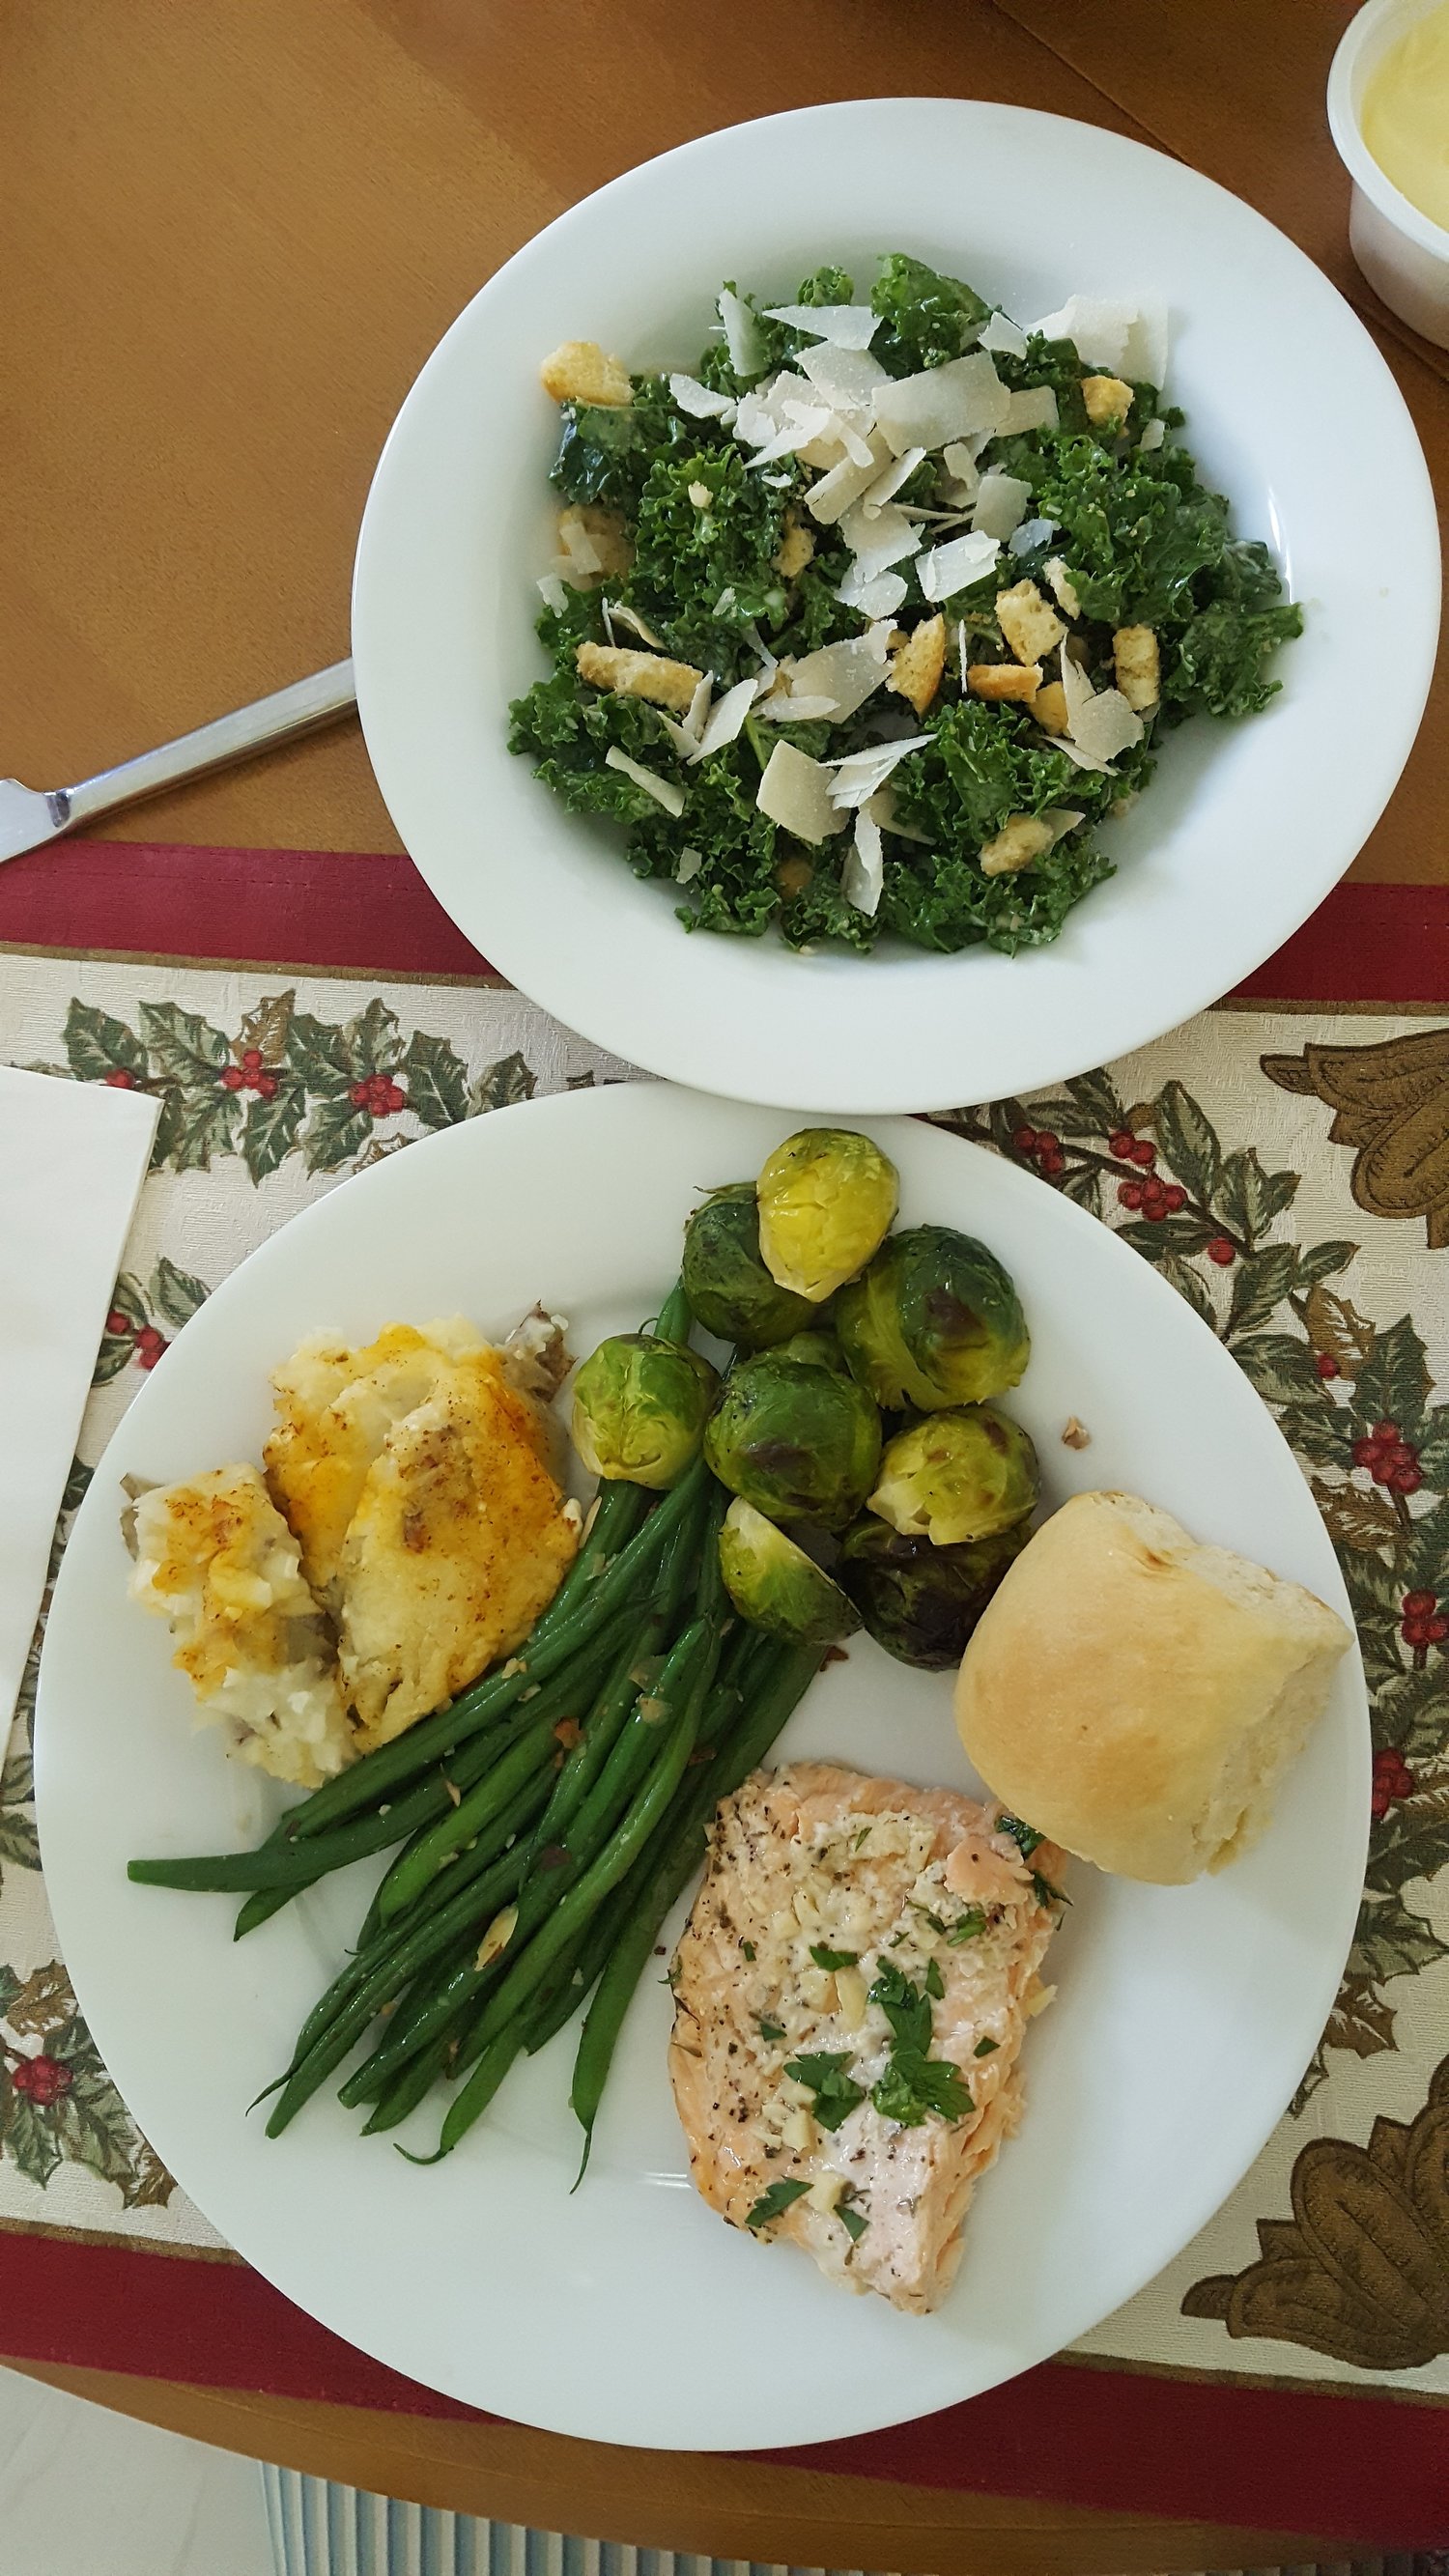 All the non-starchy veggies: kale, green beans, Brussels. And that made way for room for the carbs: roll, potato, and dessert (not pictured).